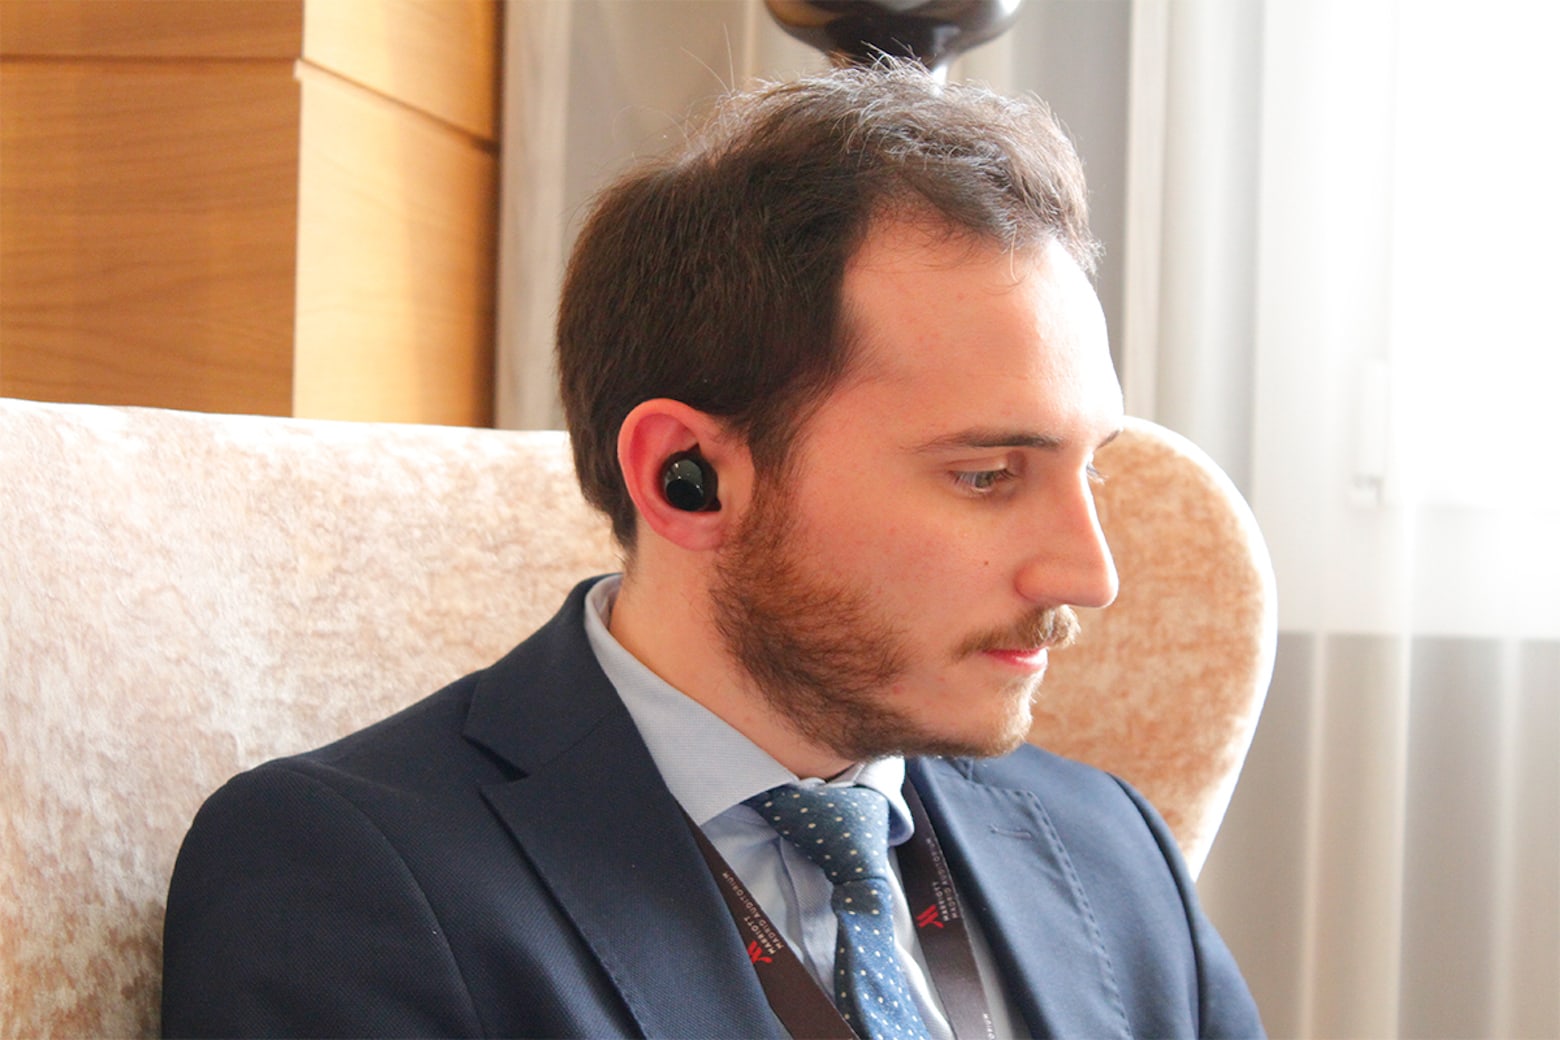 Break through the international language barrier with these award-winning translation earbuds